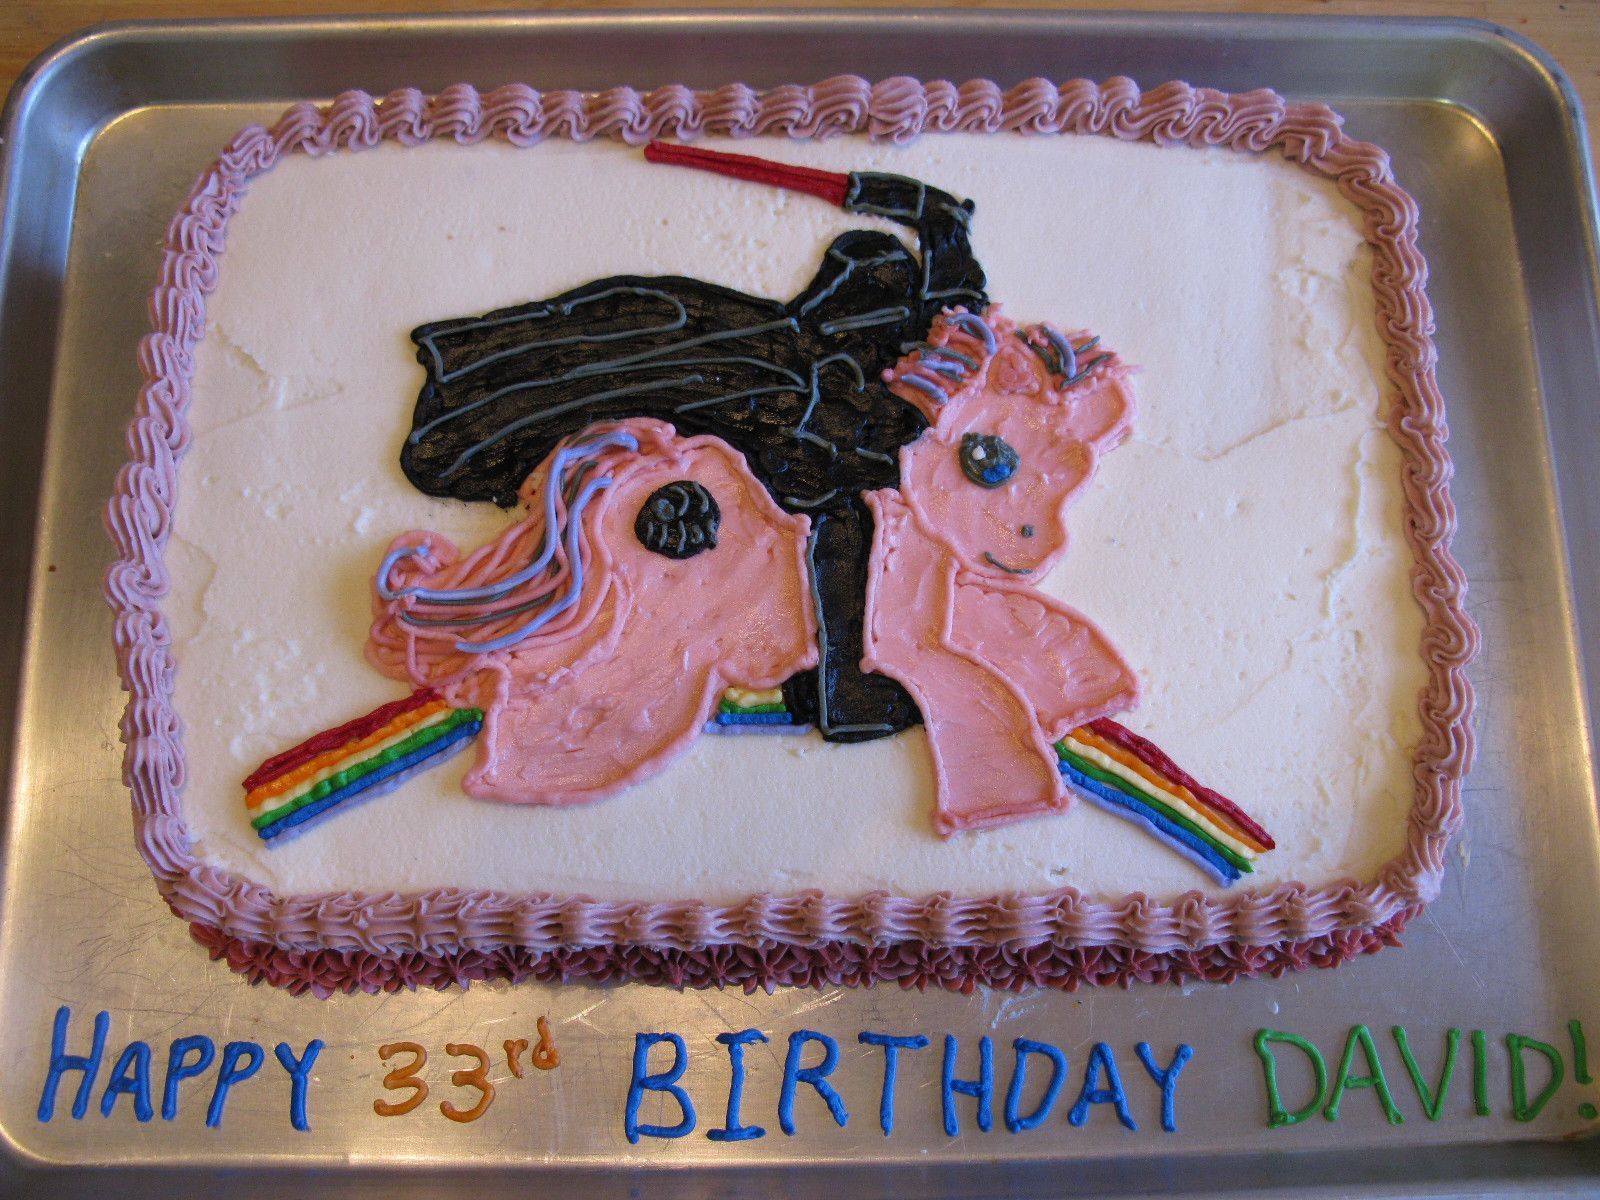 Darth Vader riding My Little Pony cake. Nailed it.